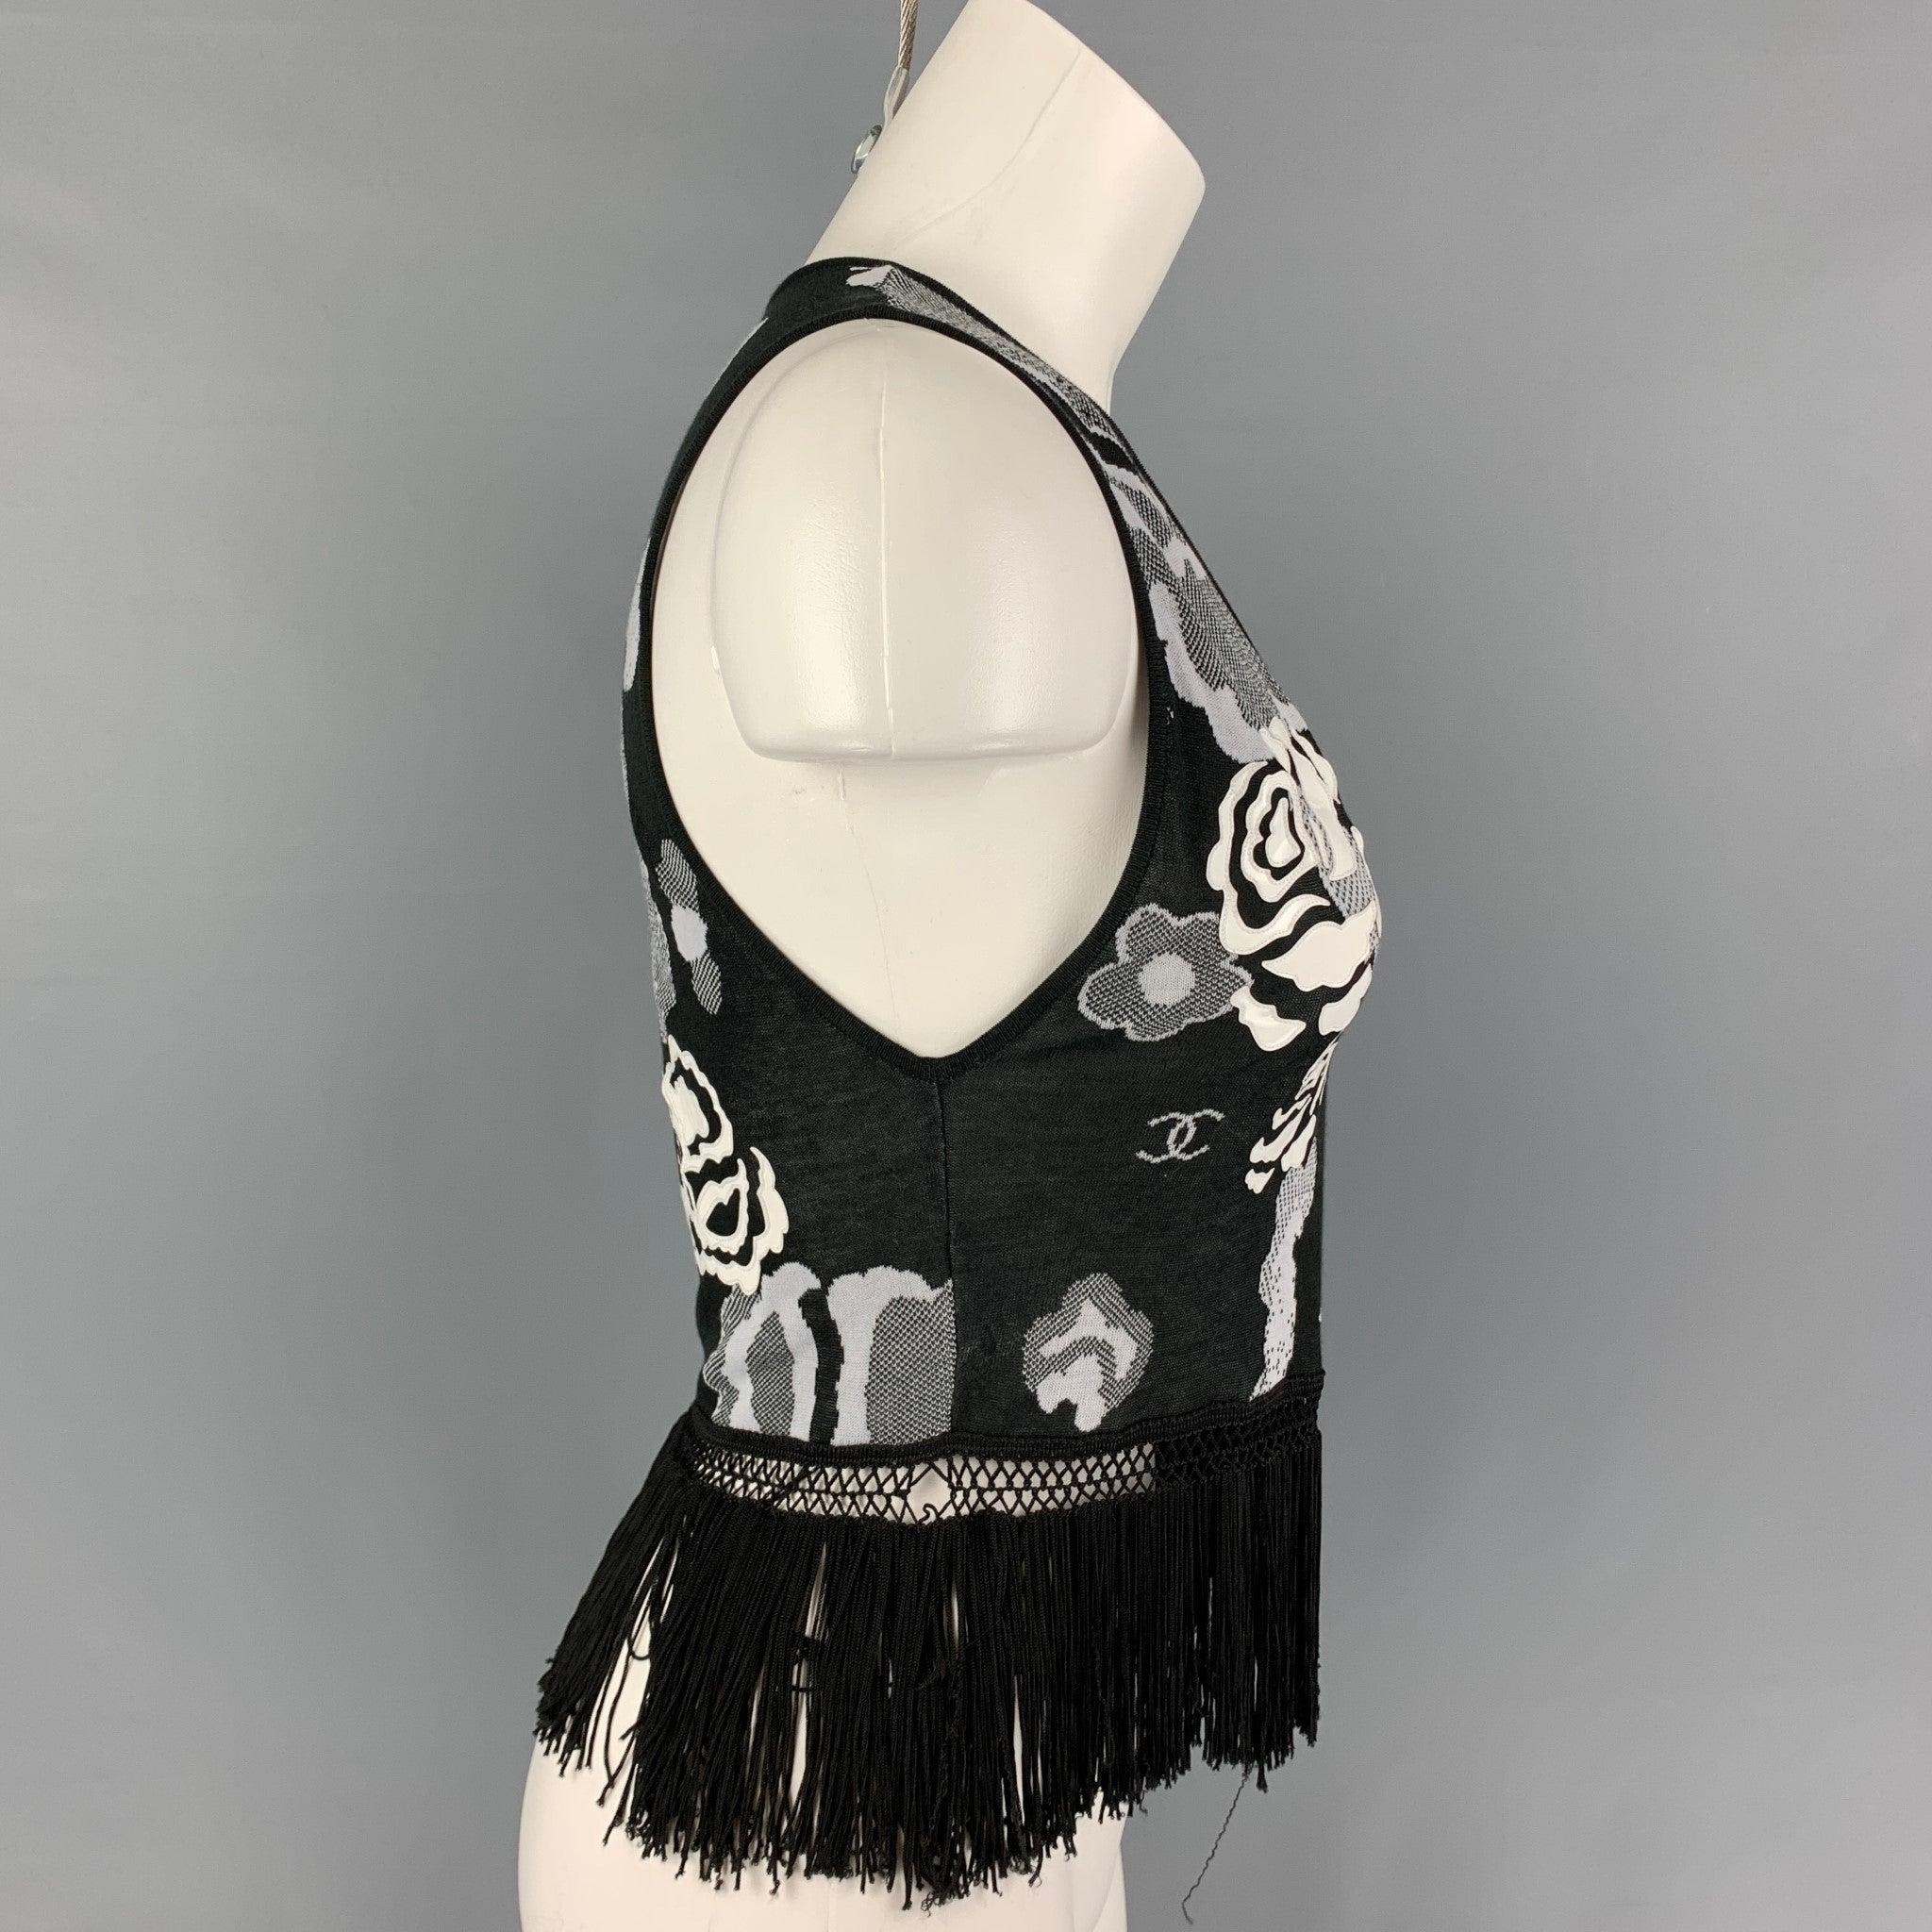 CHANEL top comes in a black & white floral cotton / rayon featuring a v-neck, fringe trim, and a buttoned closure.
Very Good
Pre-Owned Condition. Logo tag removed.  

Marked:   Size tag removed 

Measurements: 
 
Shoulder: 12 inches  Bust: 26 inches